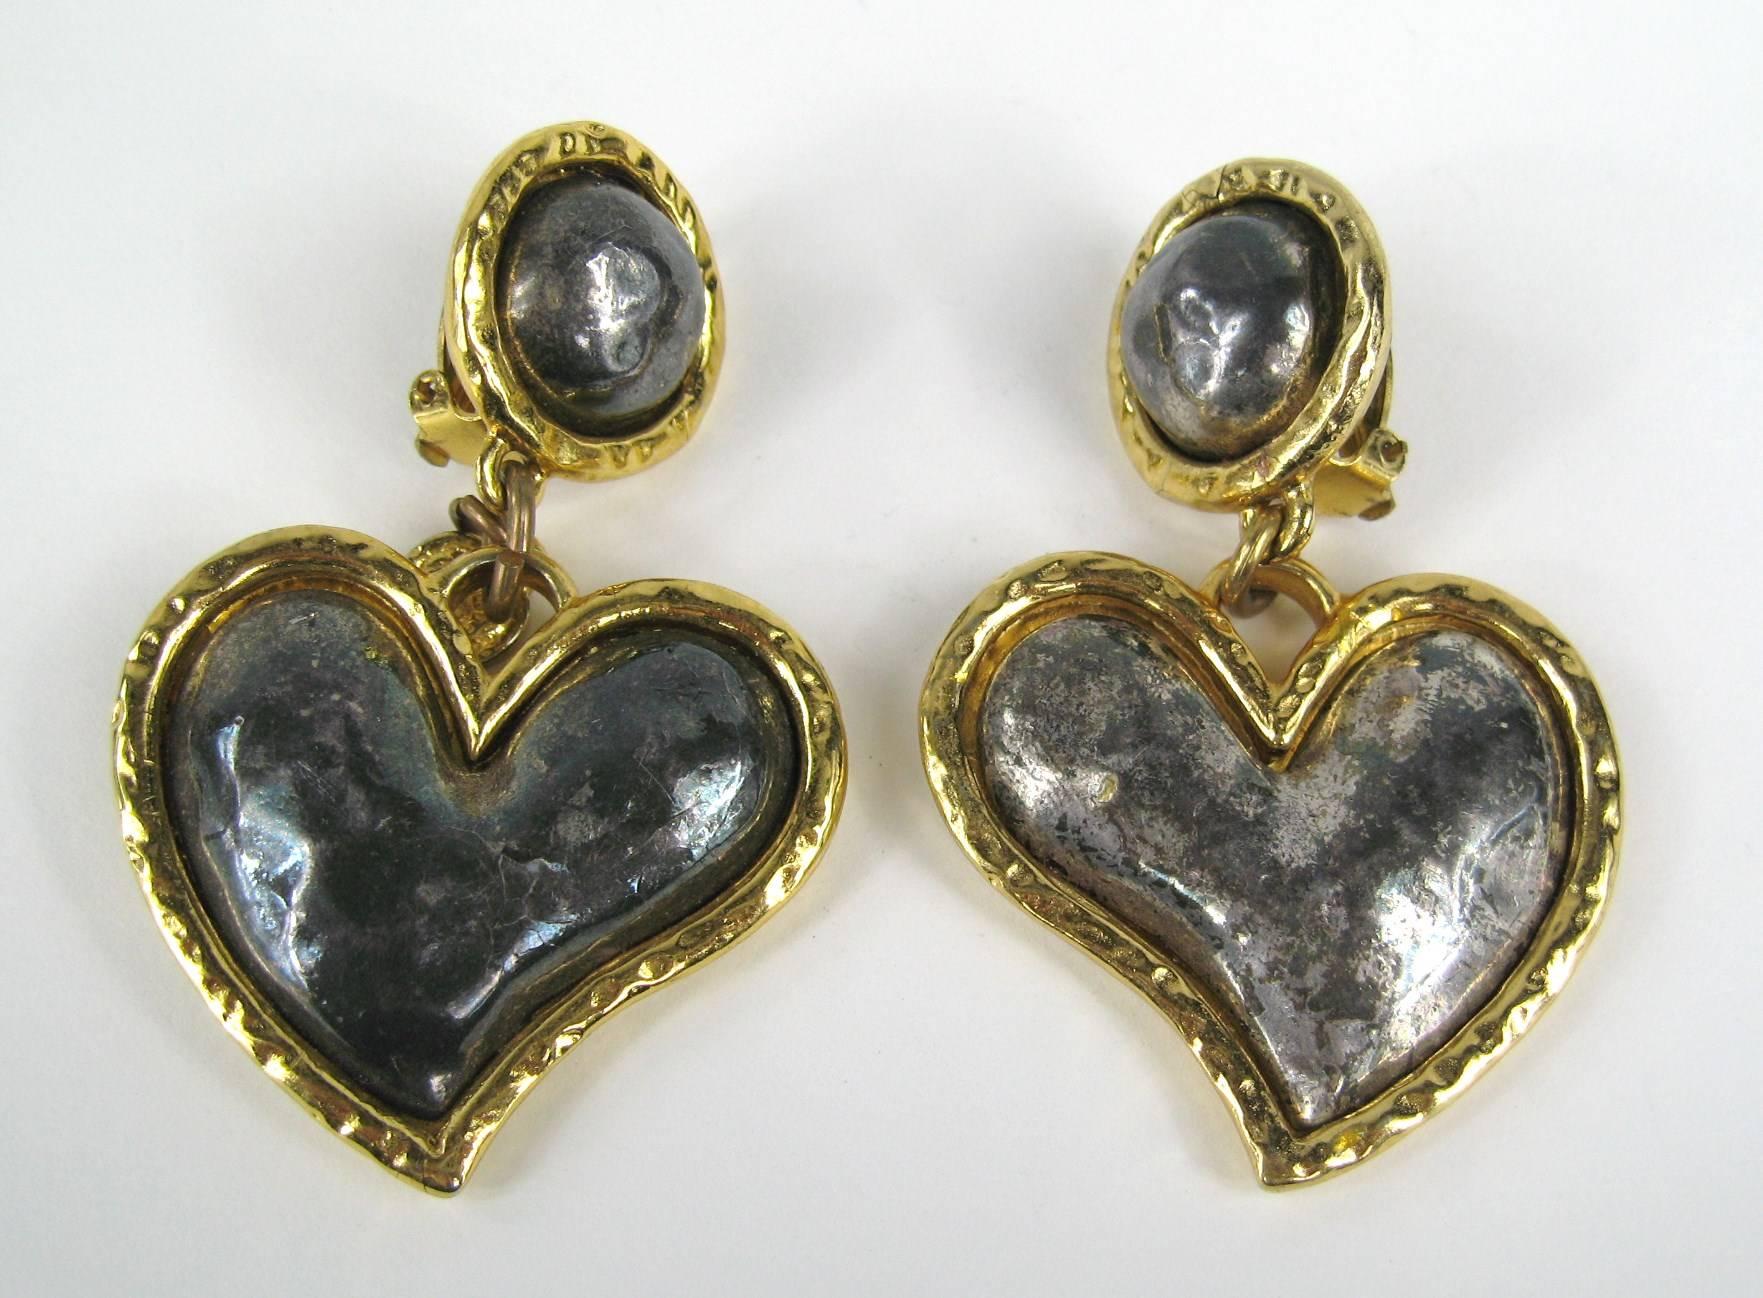 Pair of Large Heart-shaped dangle earring clip on's Circa 80s. Measuring 3.87 in. x 1.83 in. Hallmarked on the back.  Purchased and never worn as is with about 90% of our costume jewelry This is out of a massive collection of Designer Clothing as